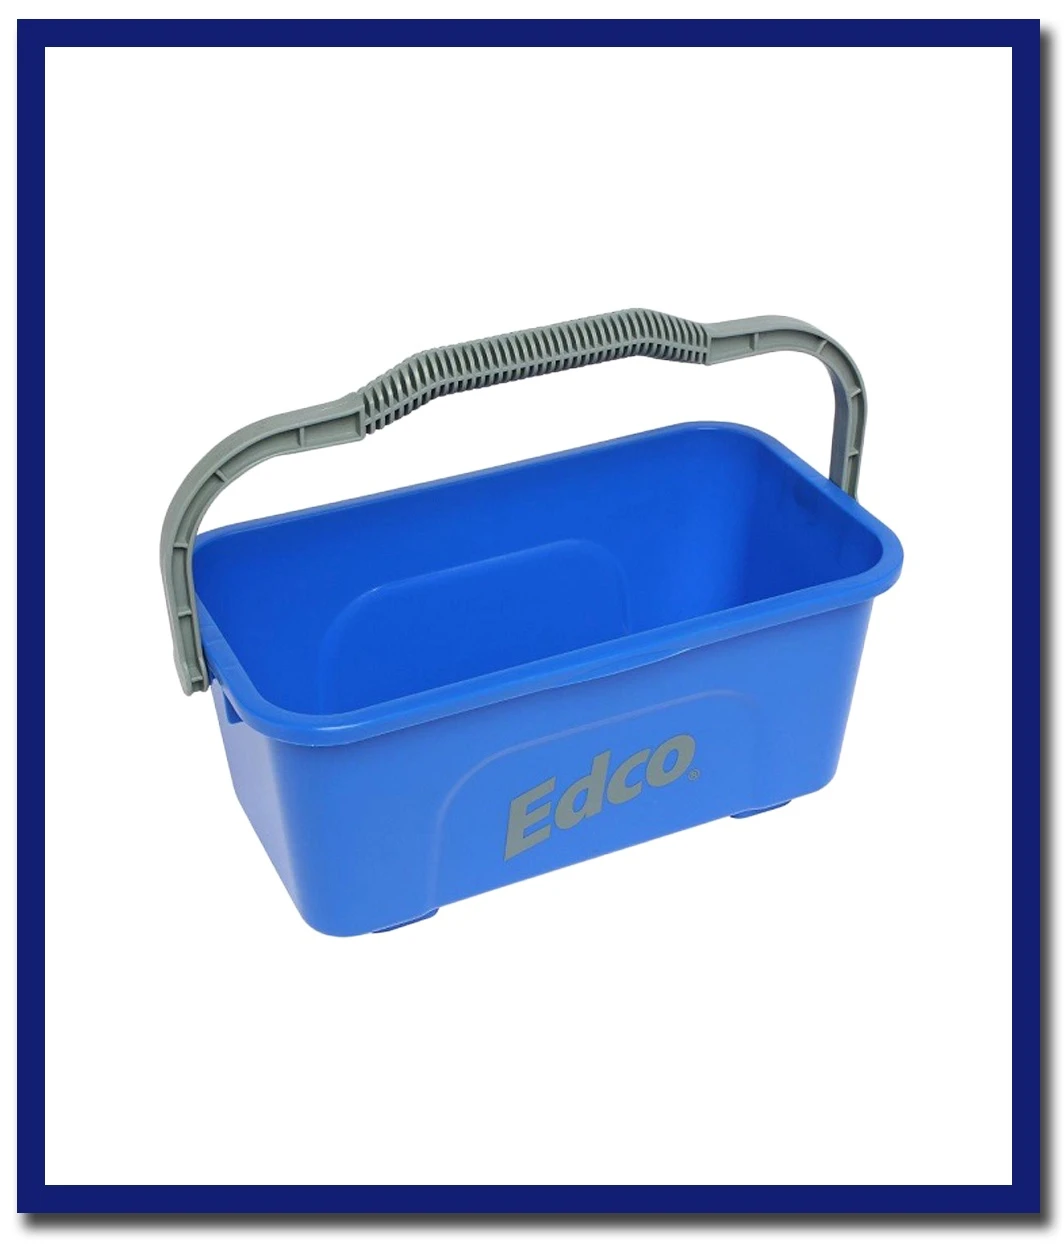 Edco All Purpose Mop & Squeegee Bucket 11LT - 1 Unit - Stone Doctor Australia - Cleaning Accessories > Mopping > Buckets